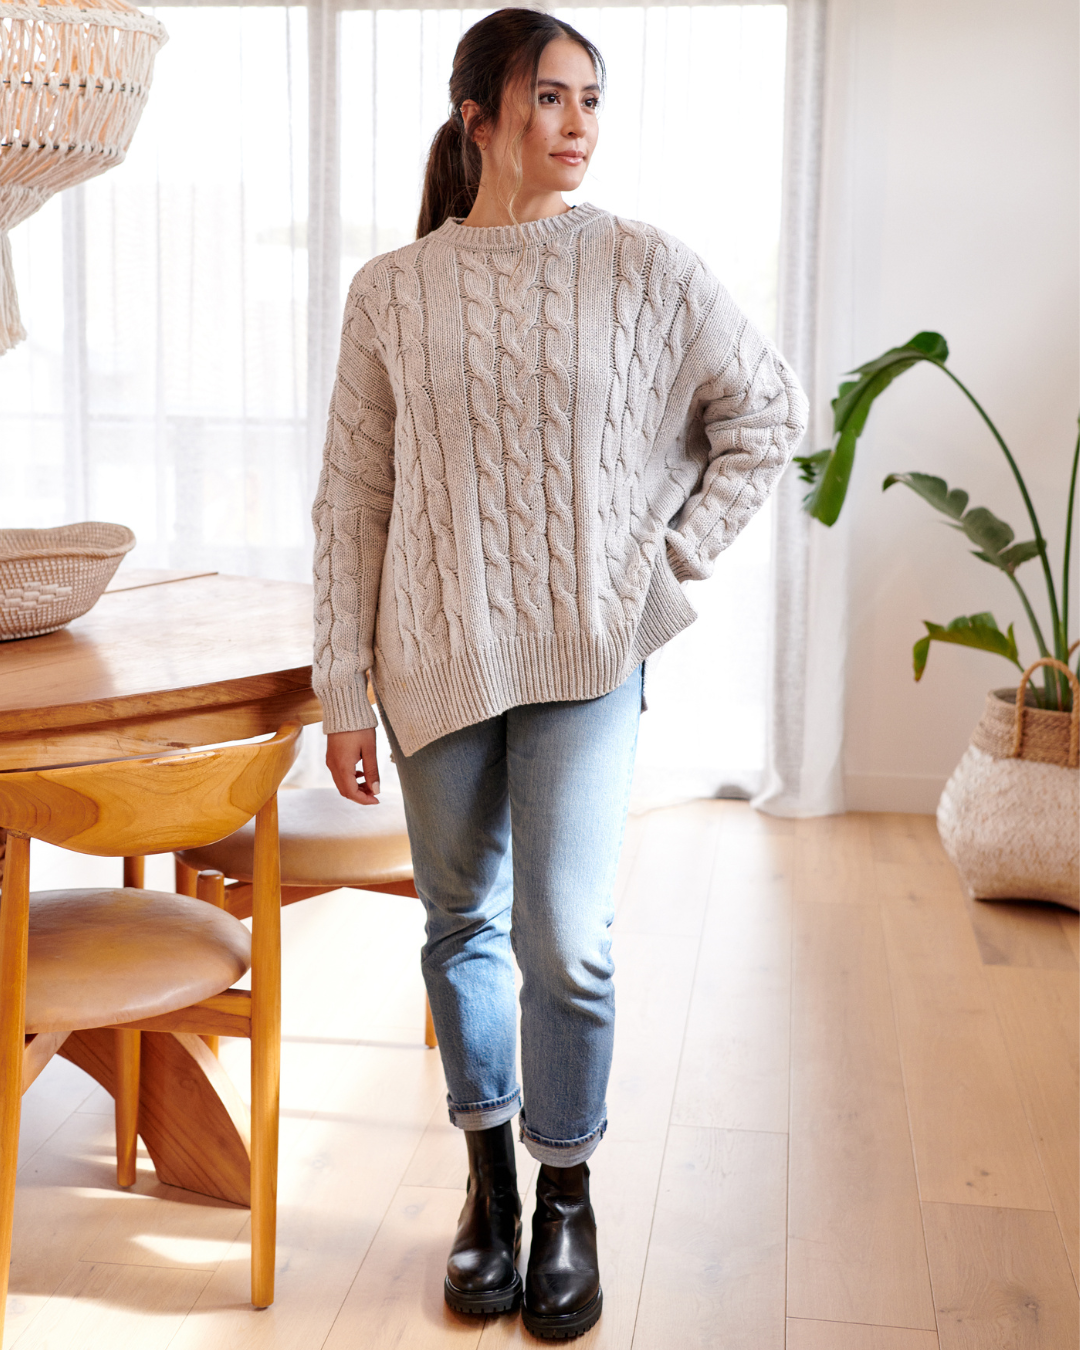 Model Mariana in our knitwear collection